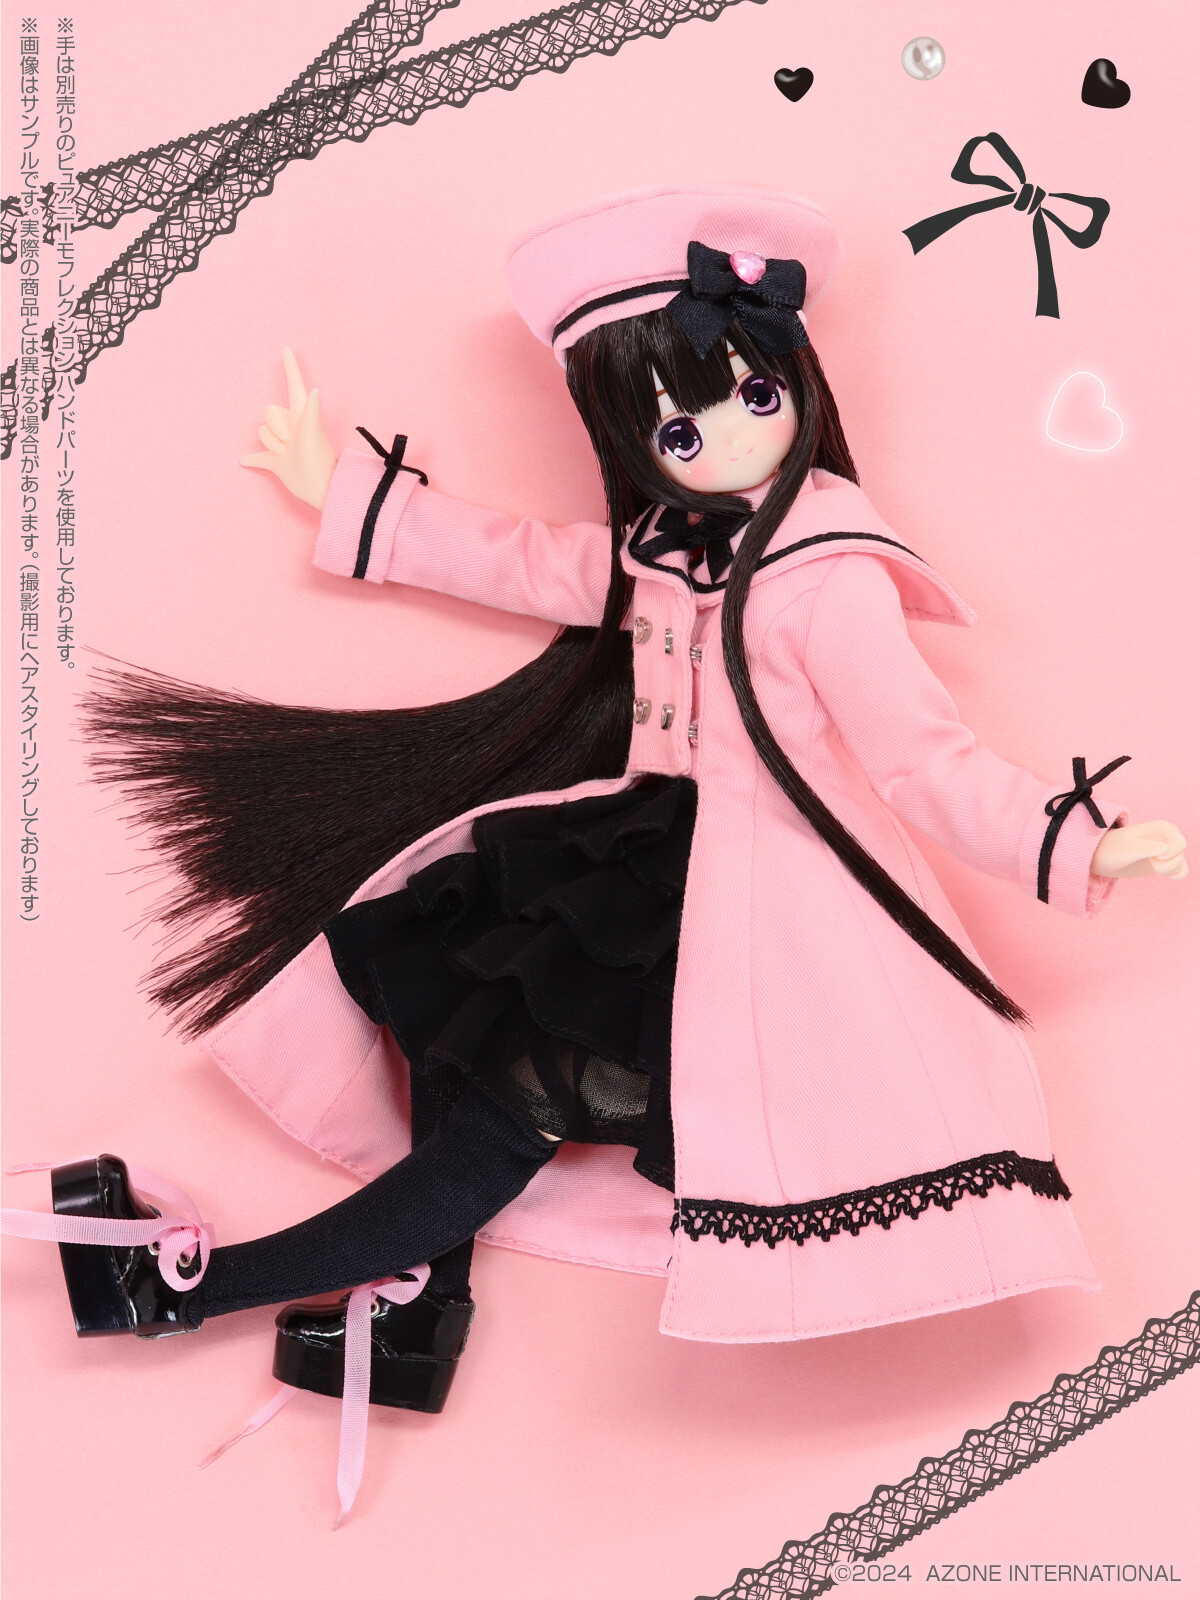 Ex-Cute 15th Series Melty Cute My Little Funny Koron: Pinkish Girl Ver.